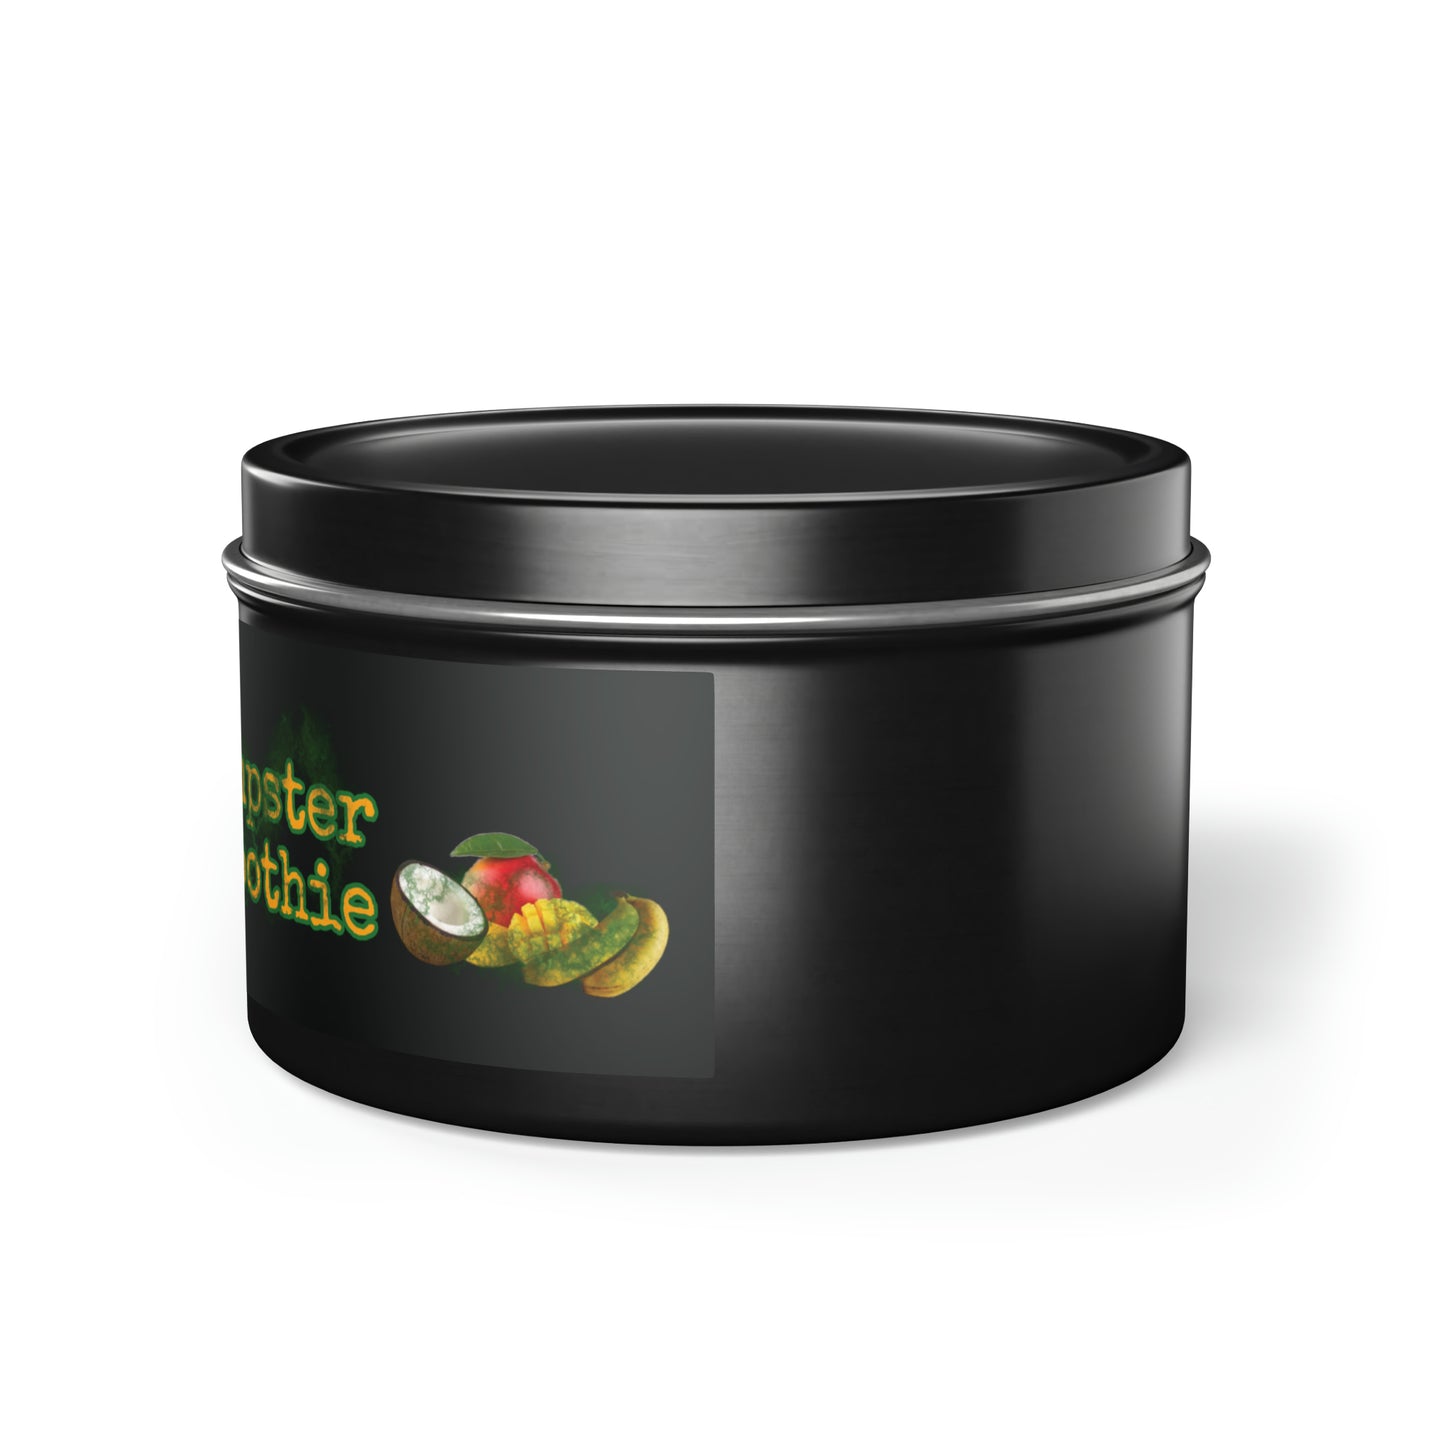 Dumpster Smoothie Tin Candle